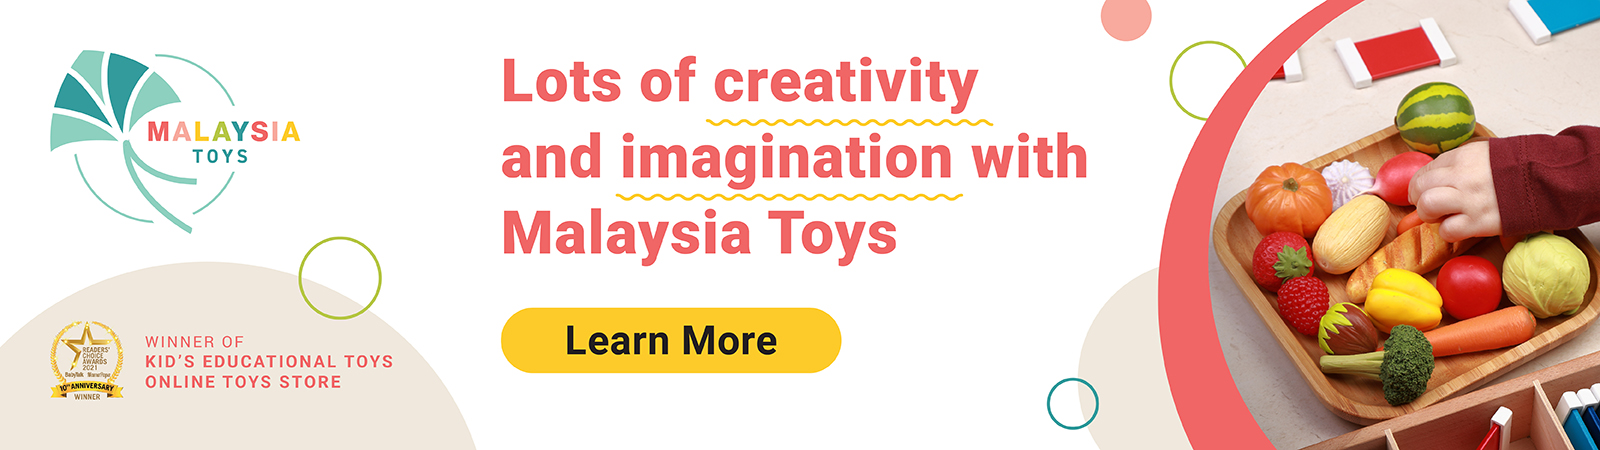 What you should know about Malaysia Toys online toy store today!